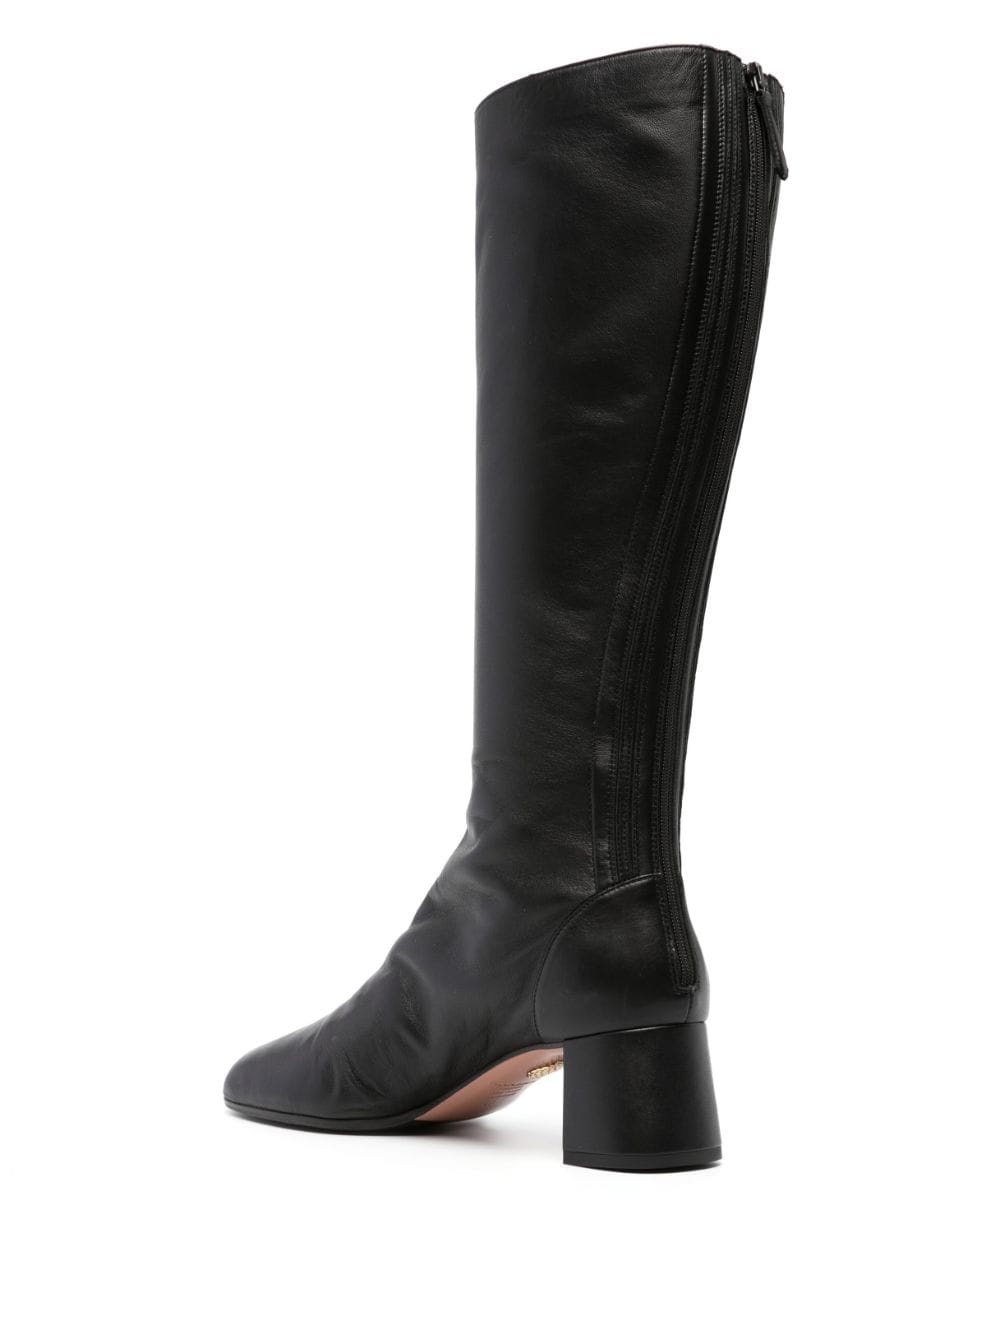 Saint Honore 50 leather knee-high boots - 3